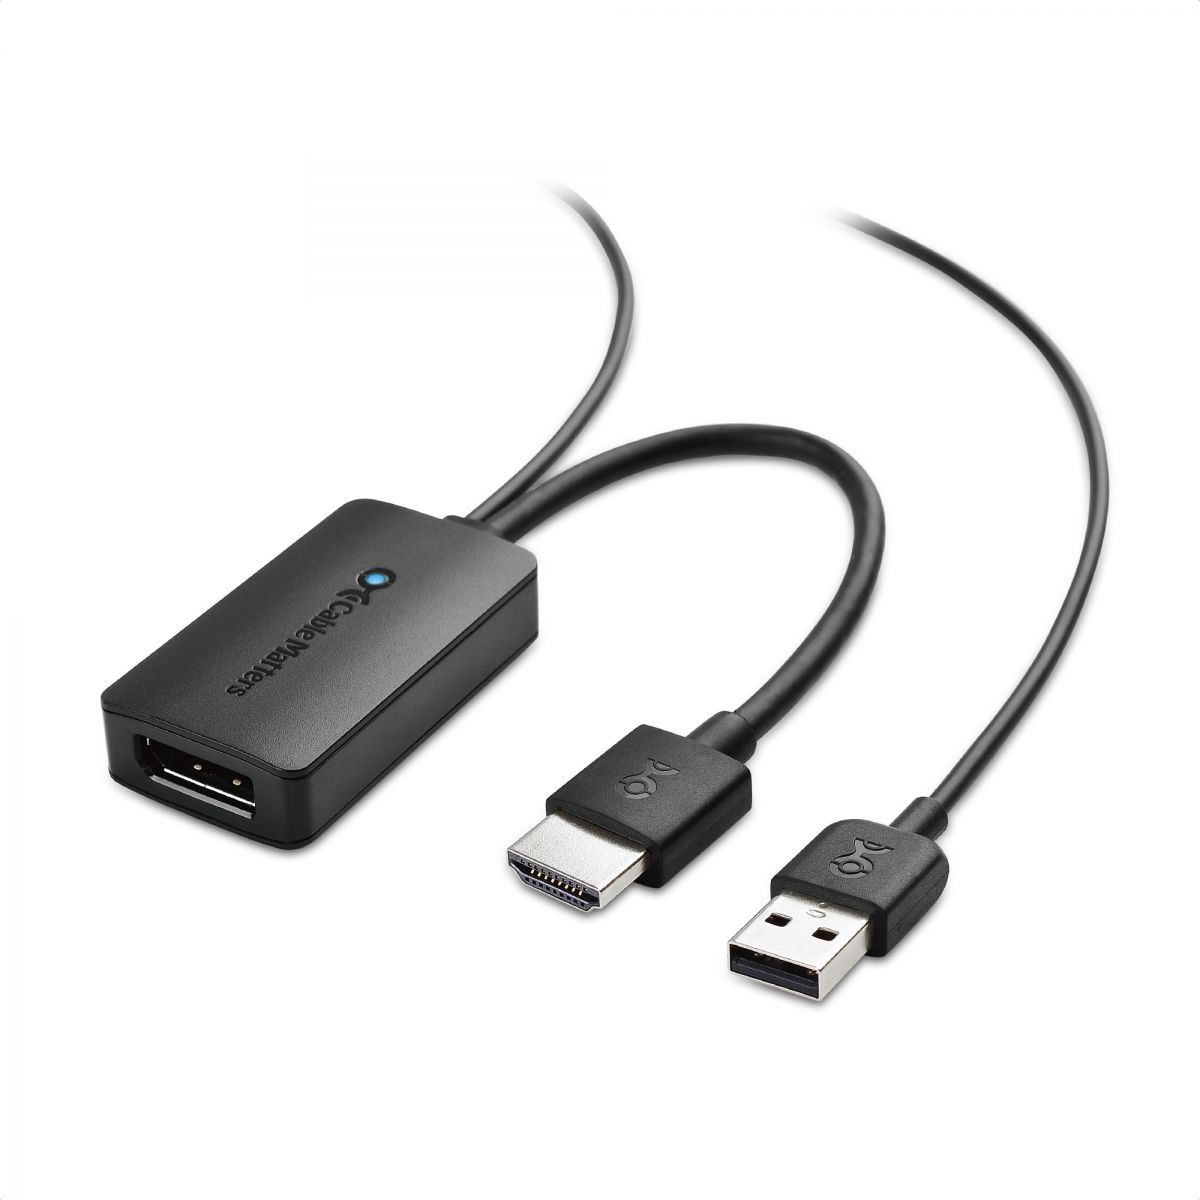 DP to HDMI Adapter is NOT Compatible with USB Ports, Do NOT Order for USB Ports on Computers Cable Matters 2-Pack DisplayPort to HDMI Adapter 